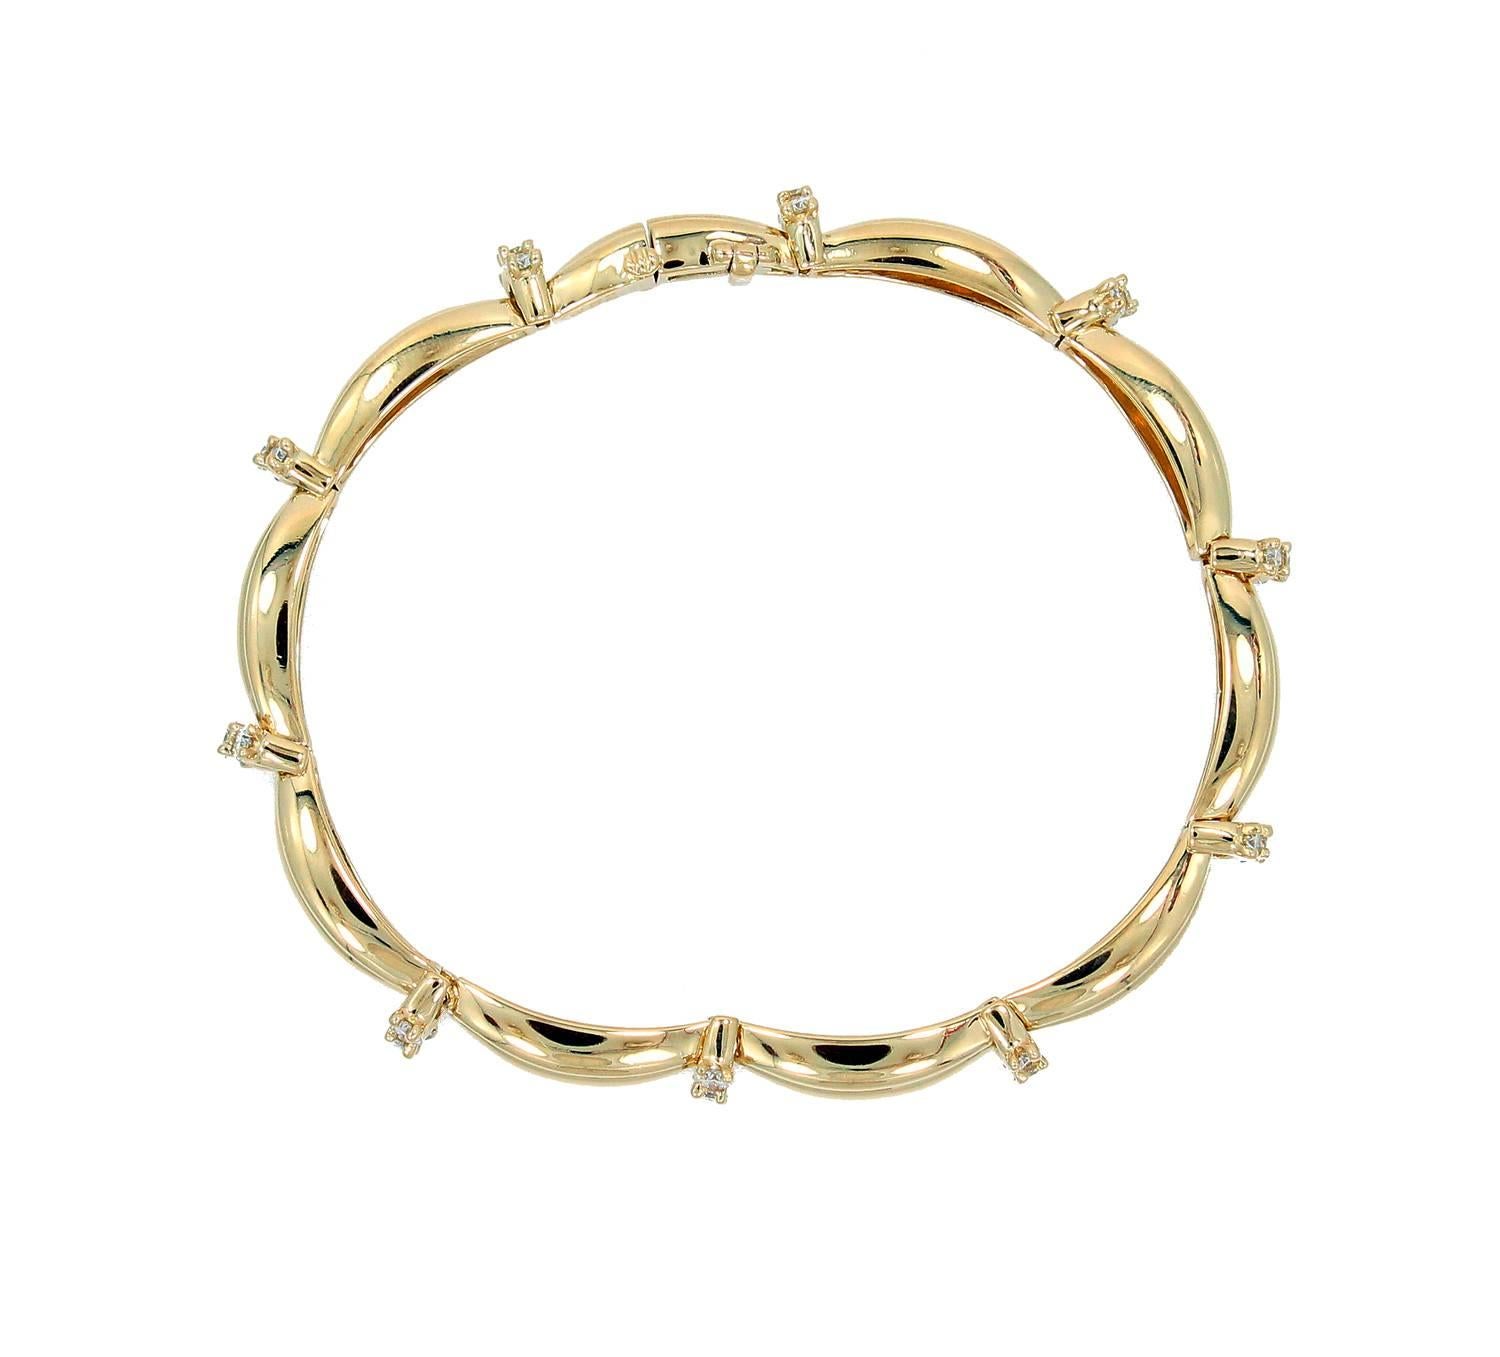 18K Yellow Gold Tiffany & Co. Bracelet with Diamond Links. This beautiful bracelet is 7 inches long and has an approximate 1.50 carats is diamonds. It is signed T&Co. Circa 1992. In new condition. 